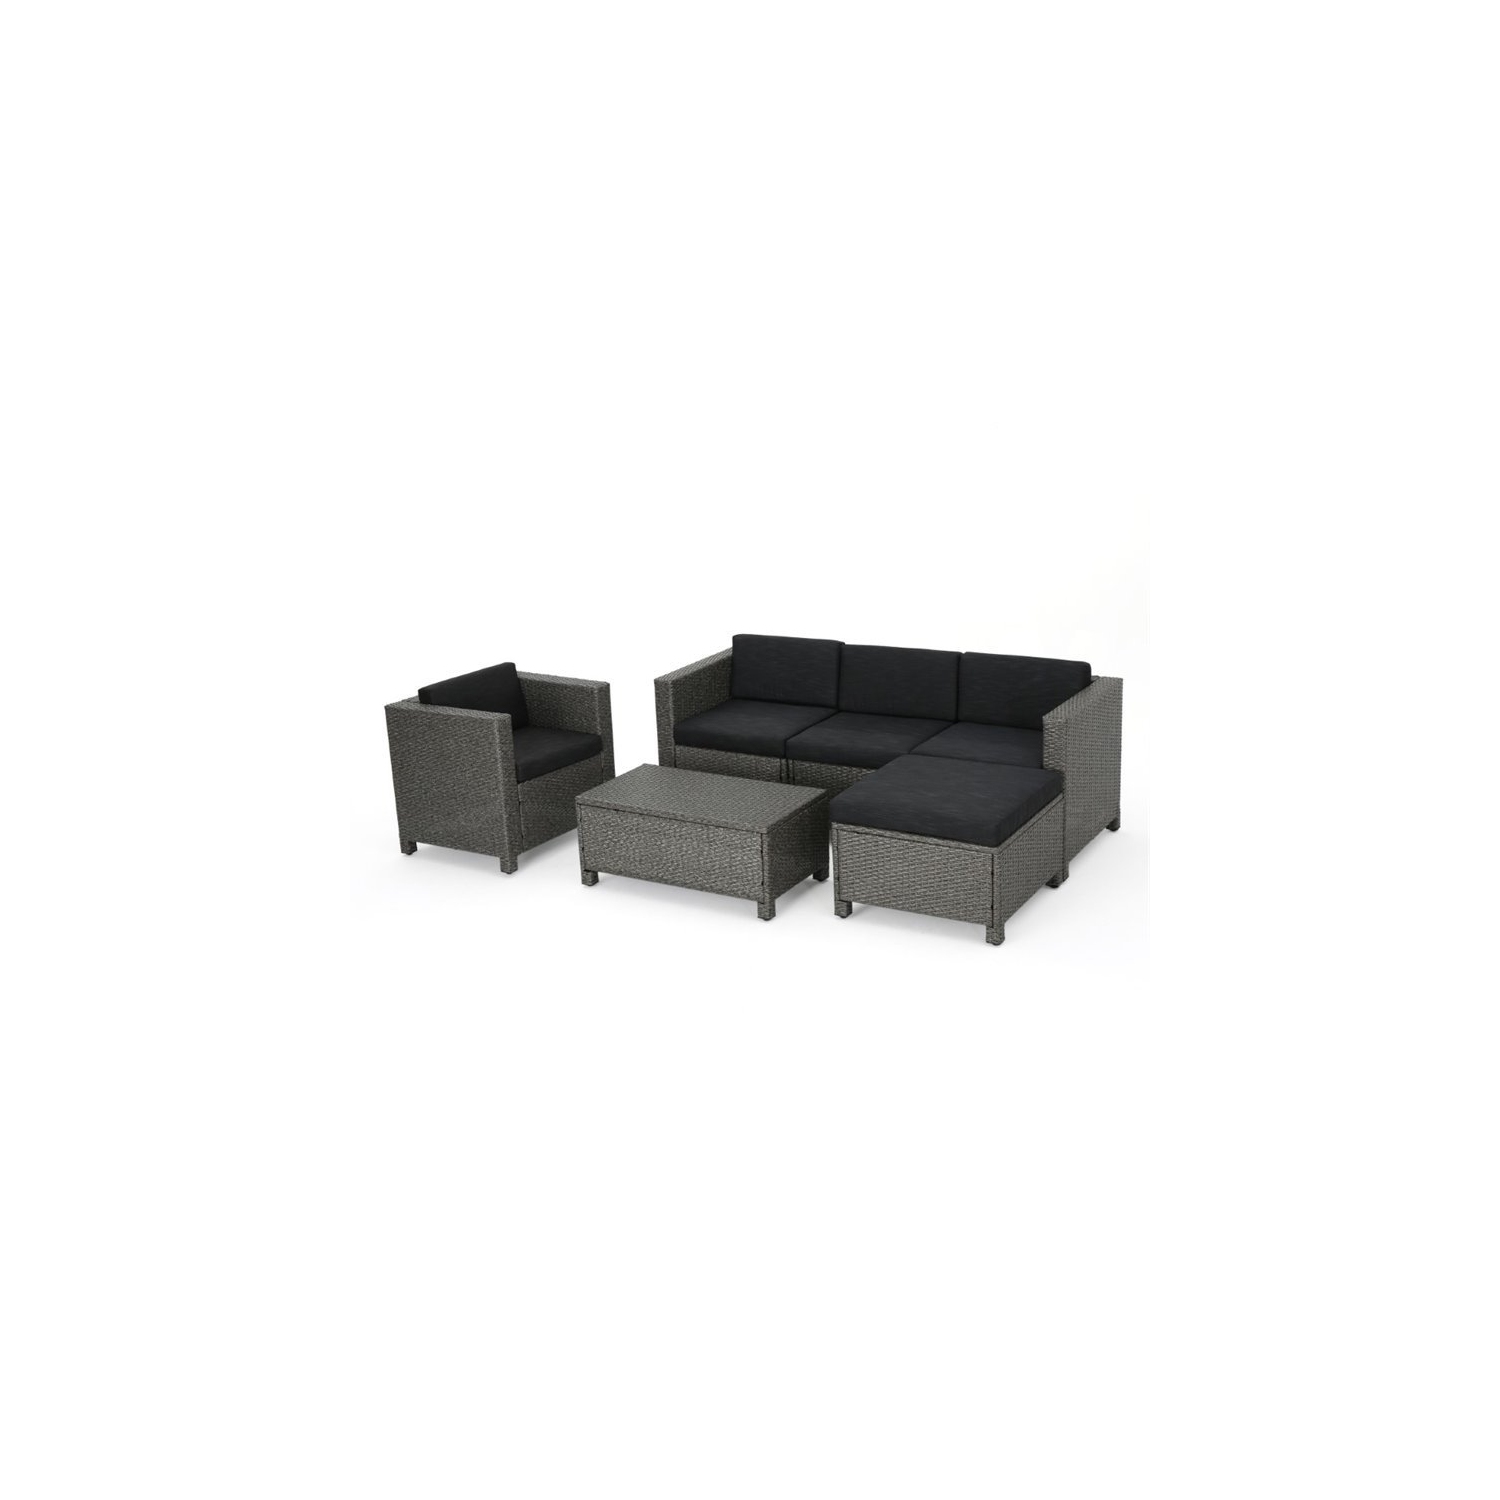 Noble House Puerta 6 Piece Outdoor Wicker Sectional Sofa Set in Black